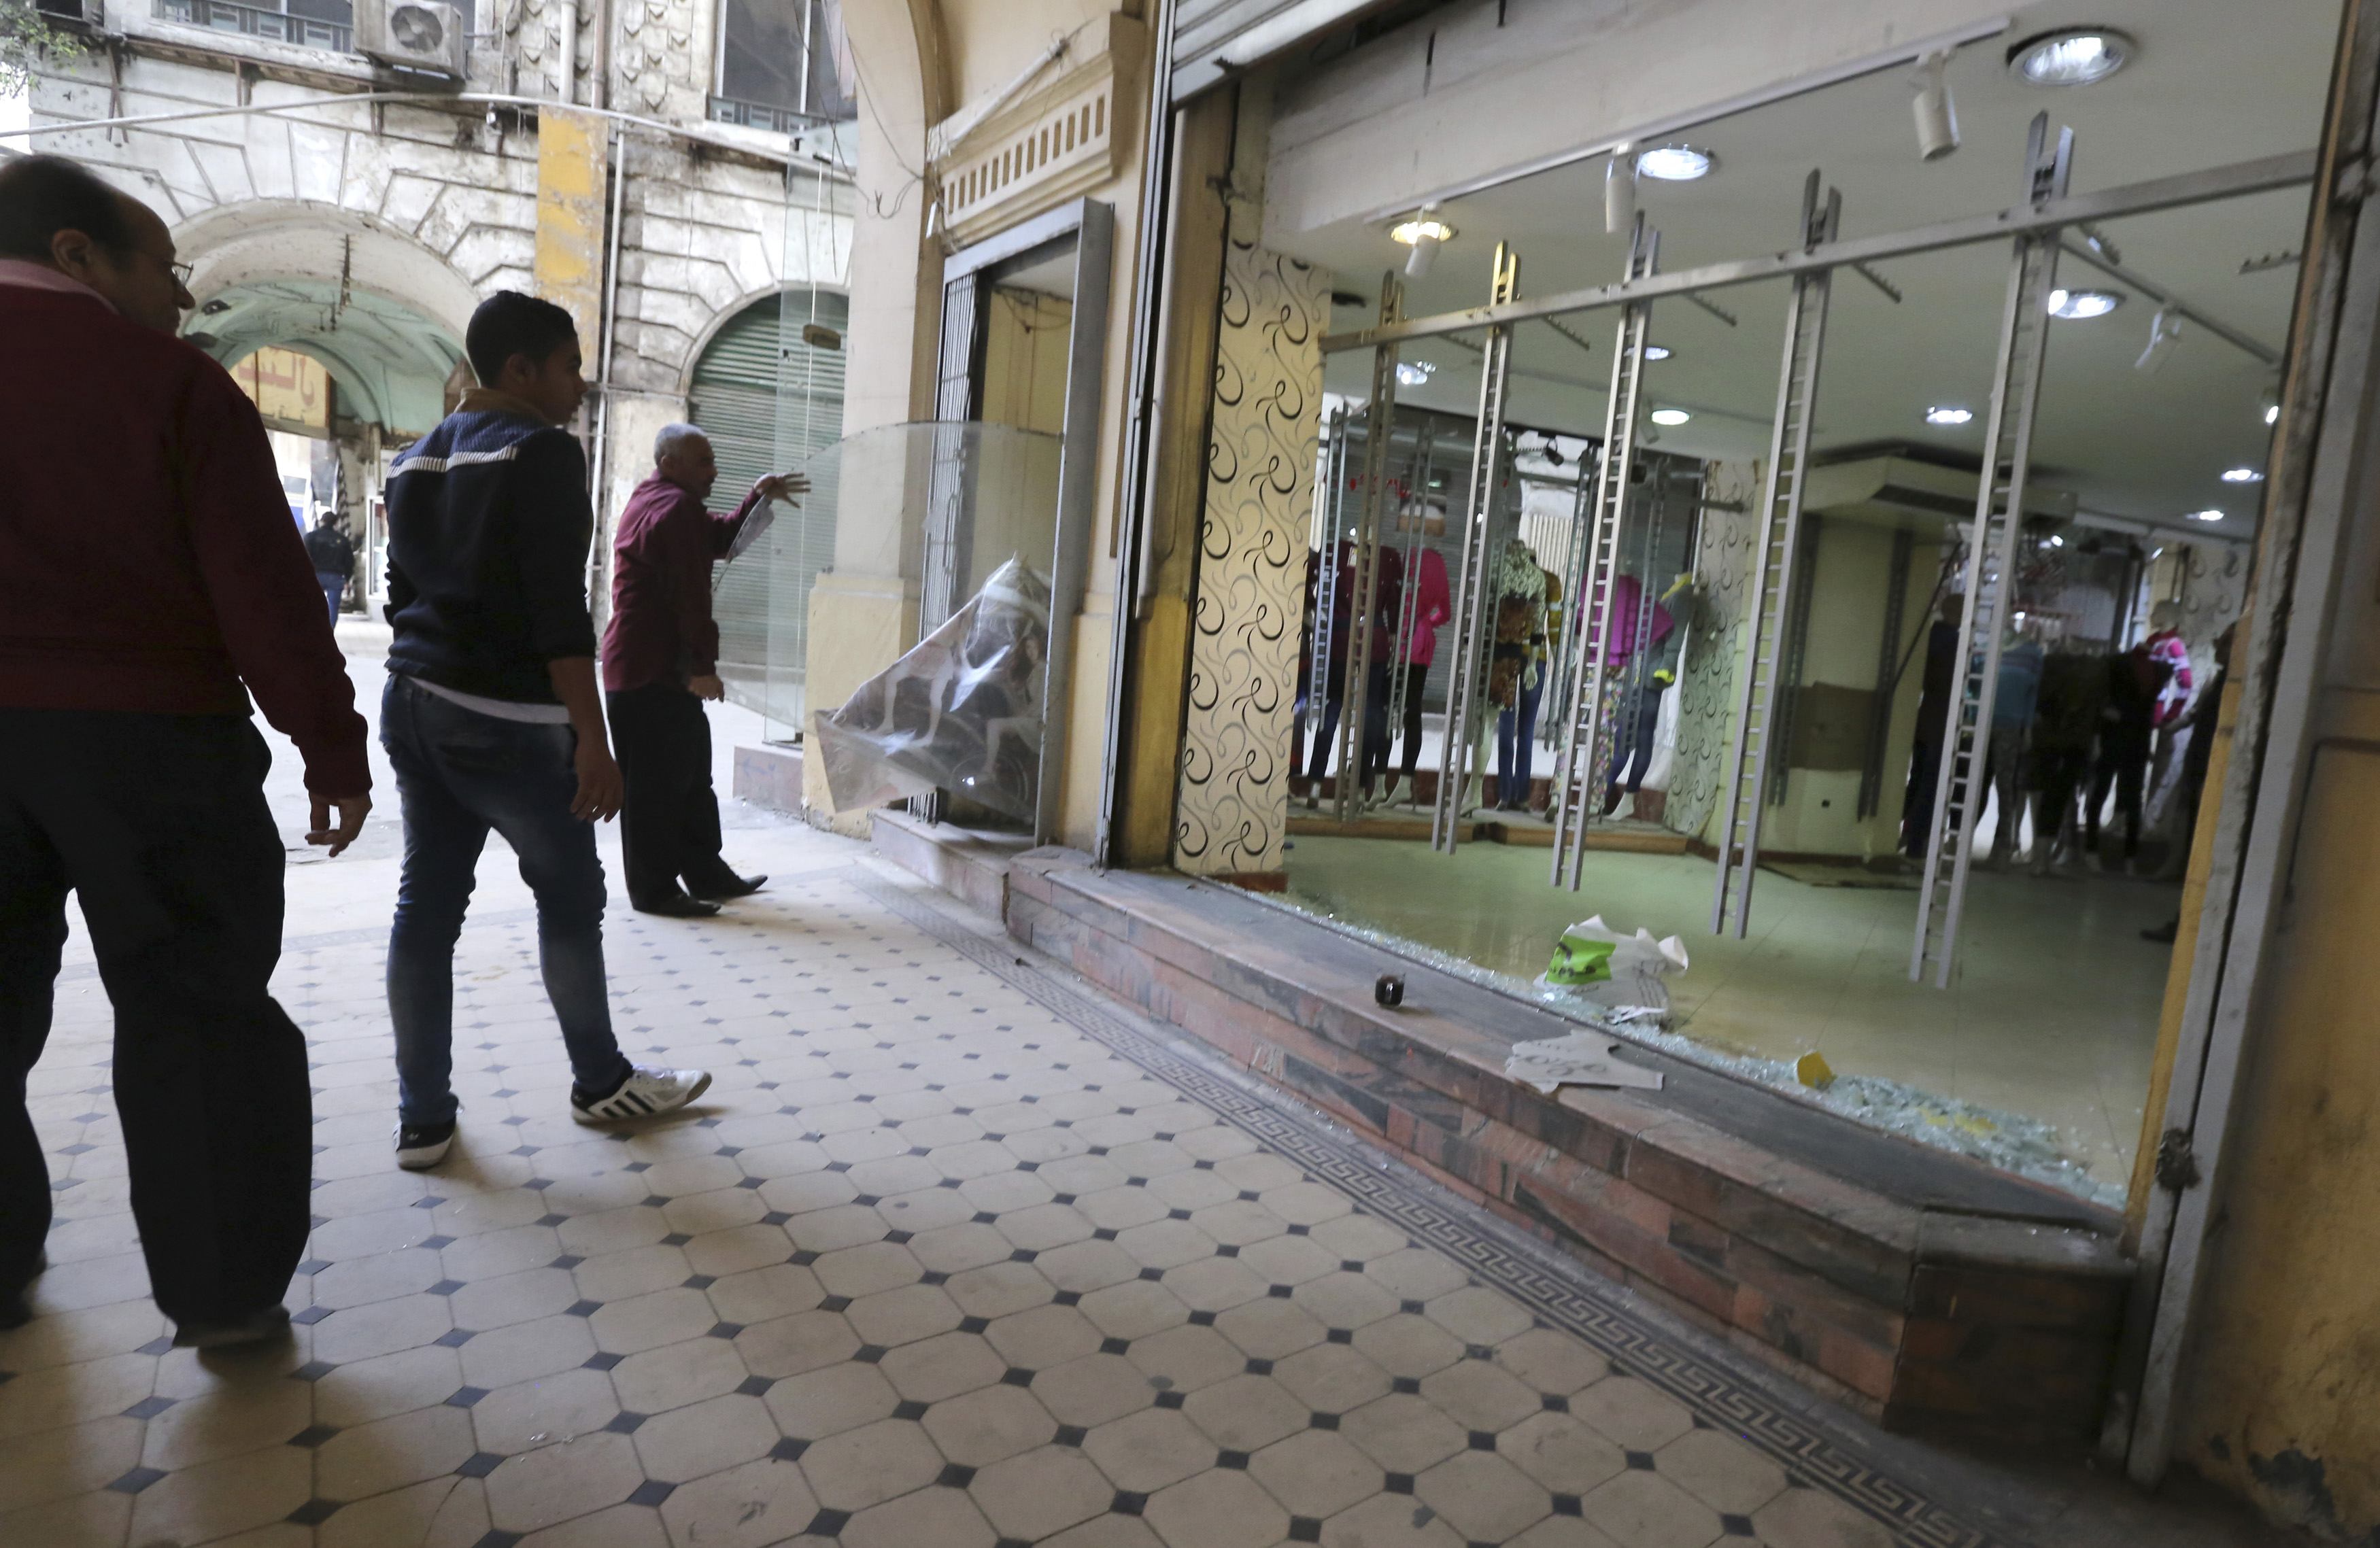 4 injured in blast outside Alexandria bank - medical official